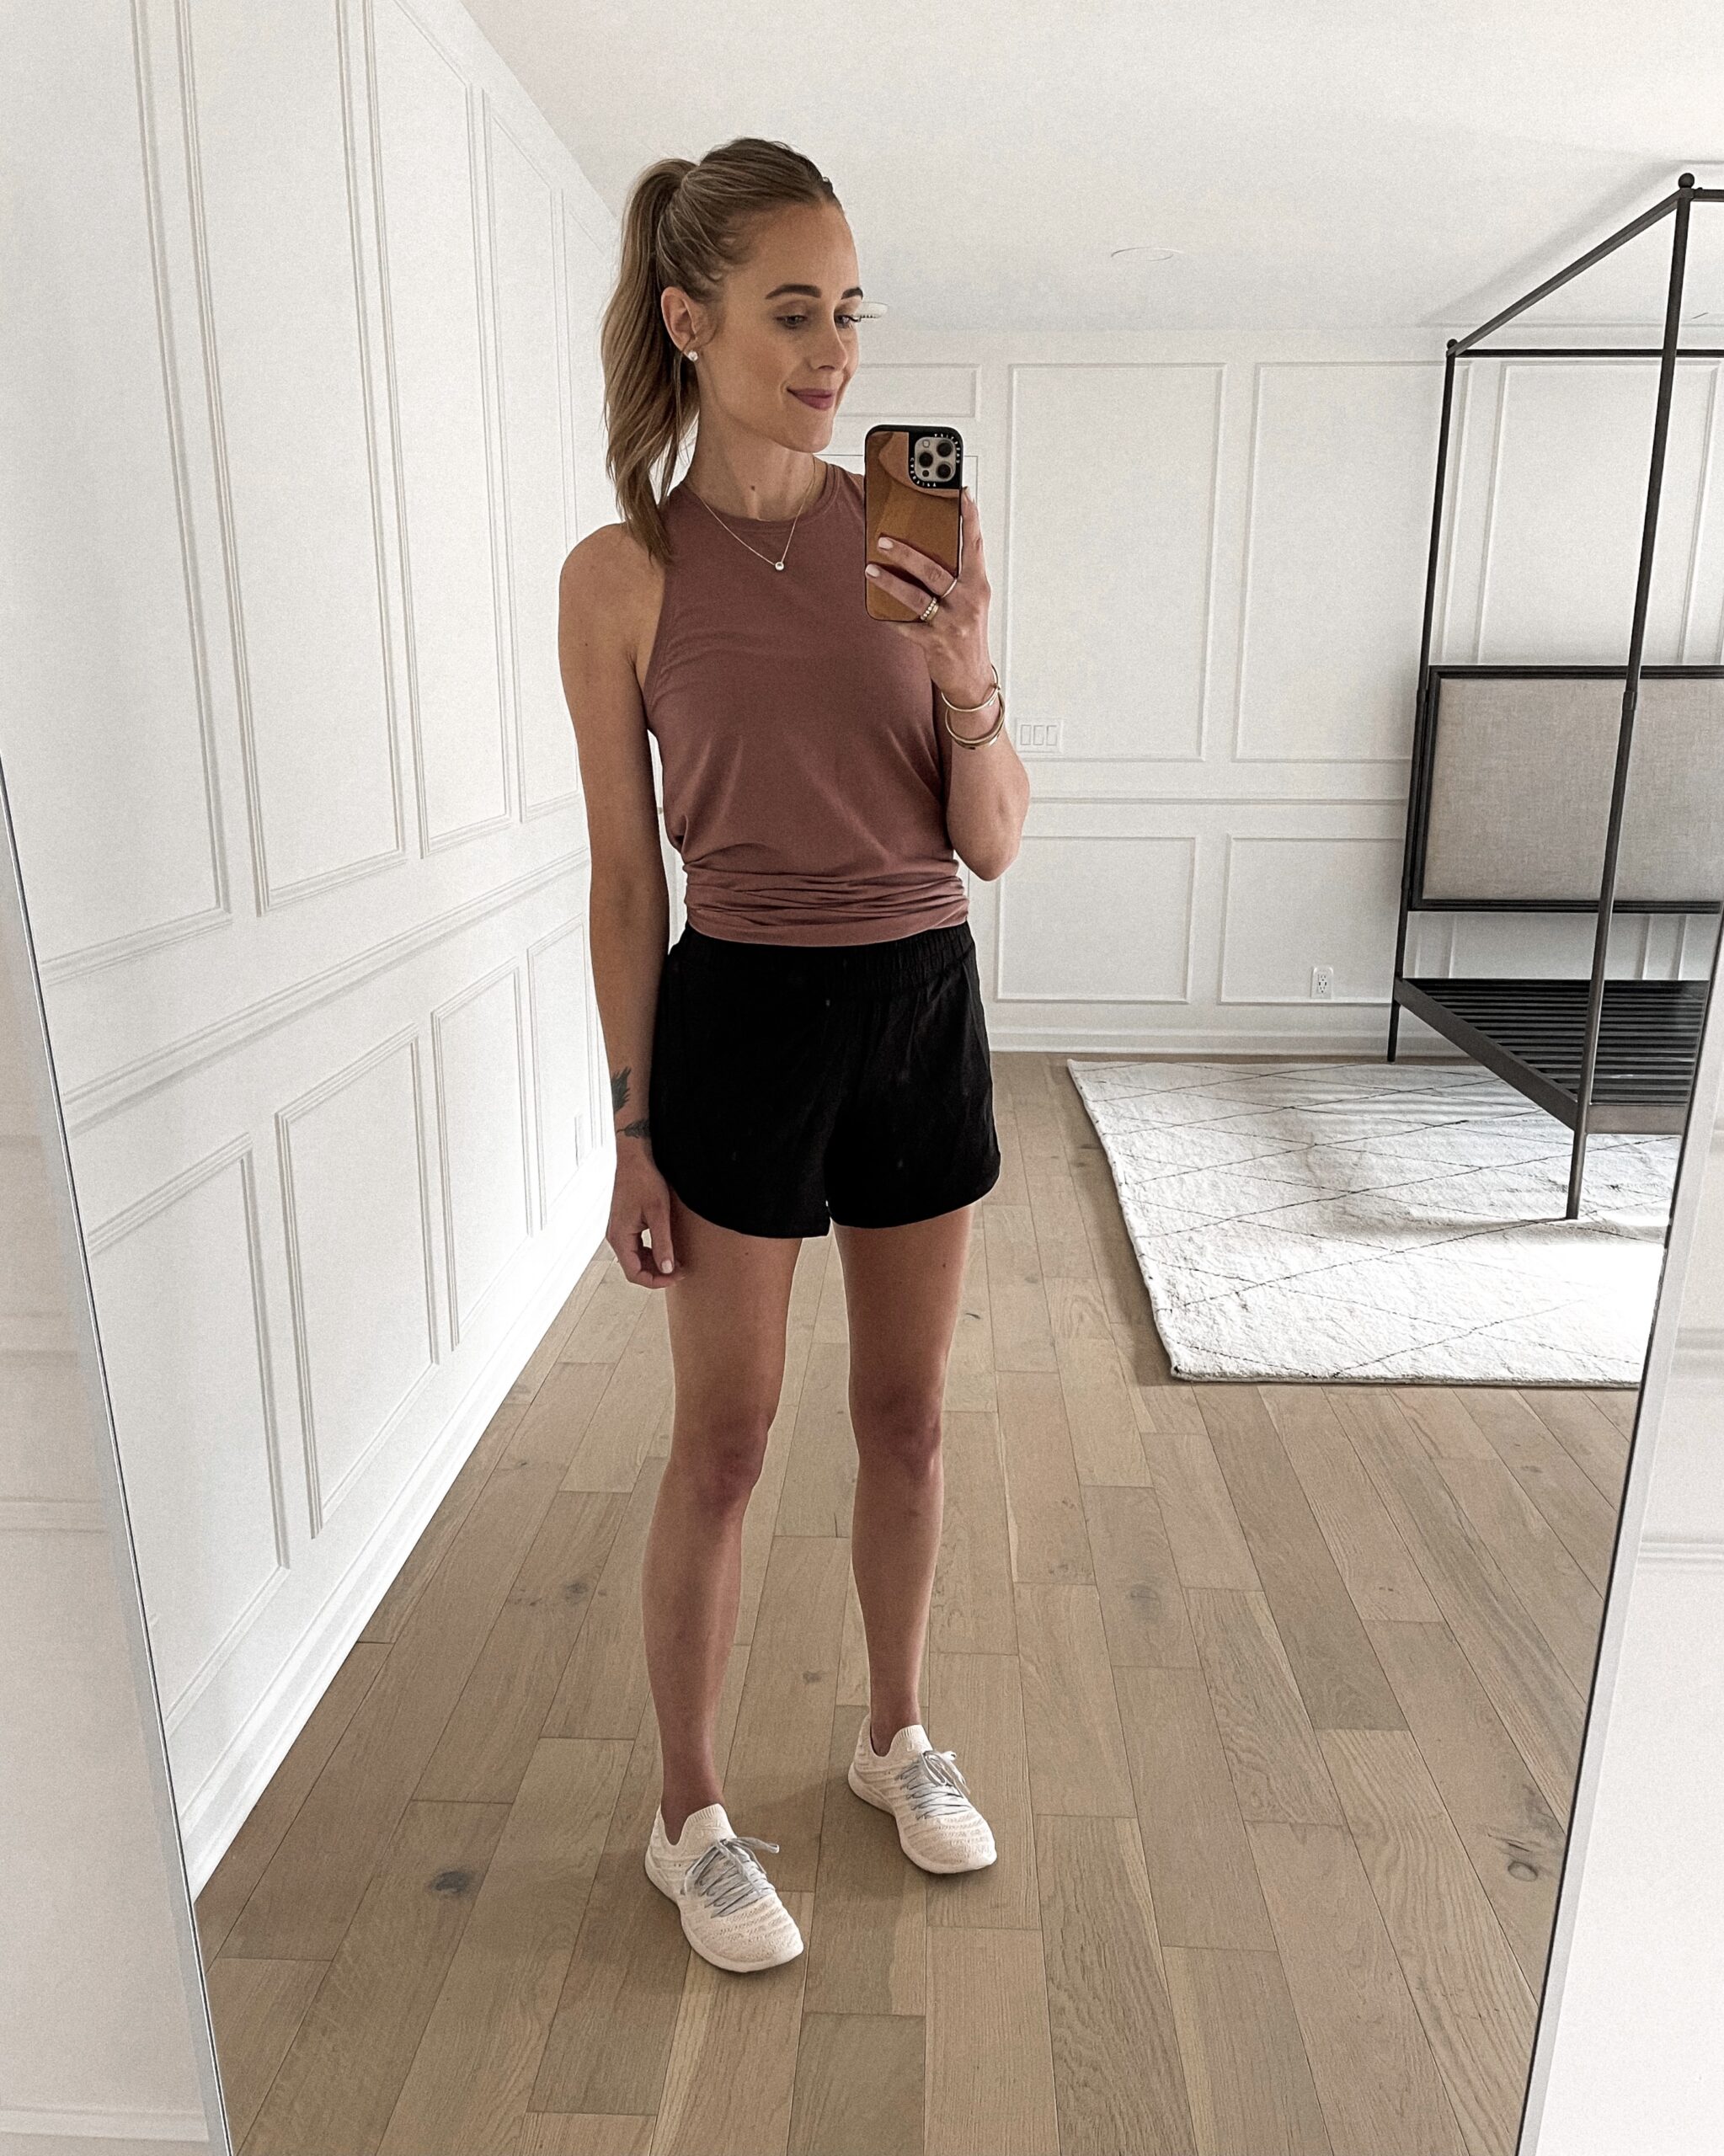 Fashion Look Featuring Lululemon Tops and Alo Shorts by